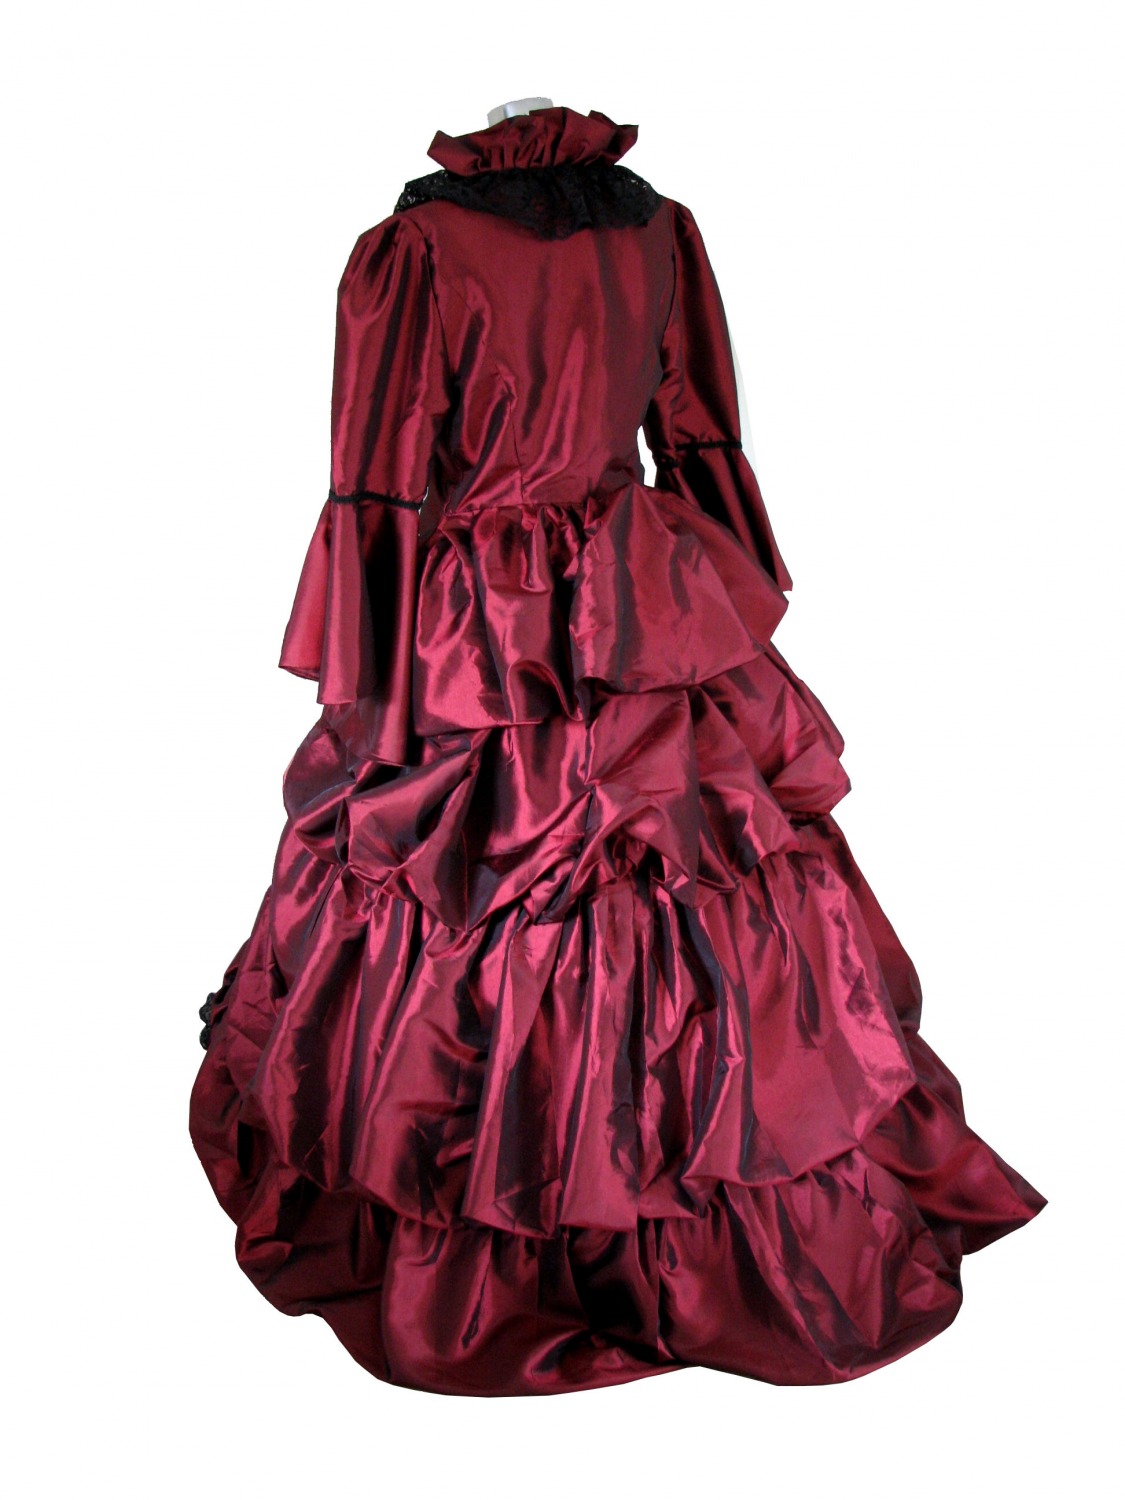 Ladies Deluxe Victorian Evening Ball Gown Size 14 - 16 - Complete ...